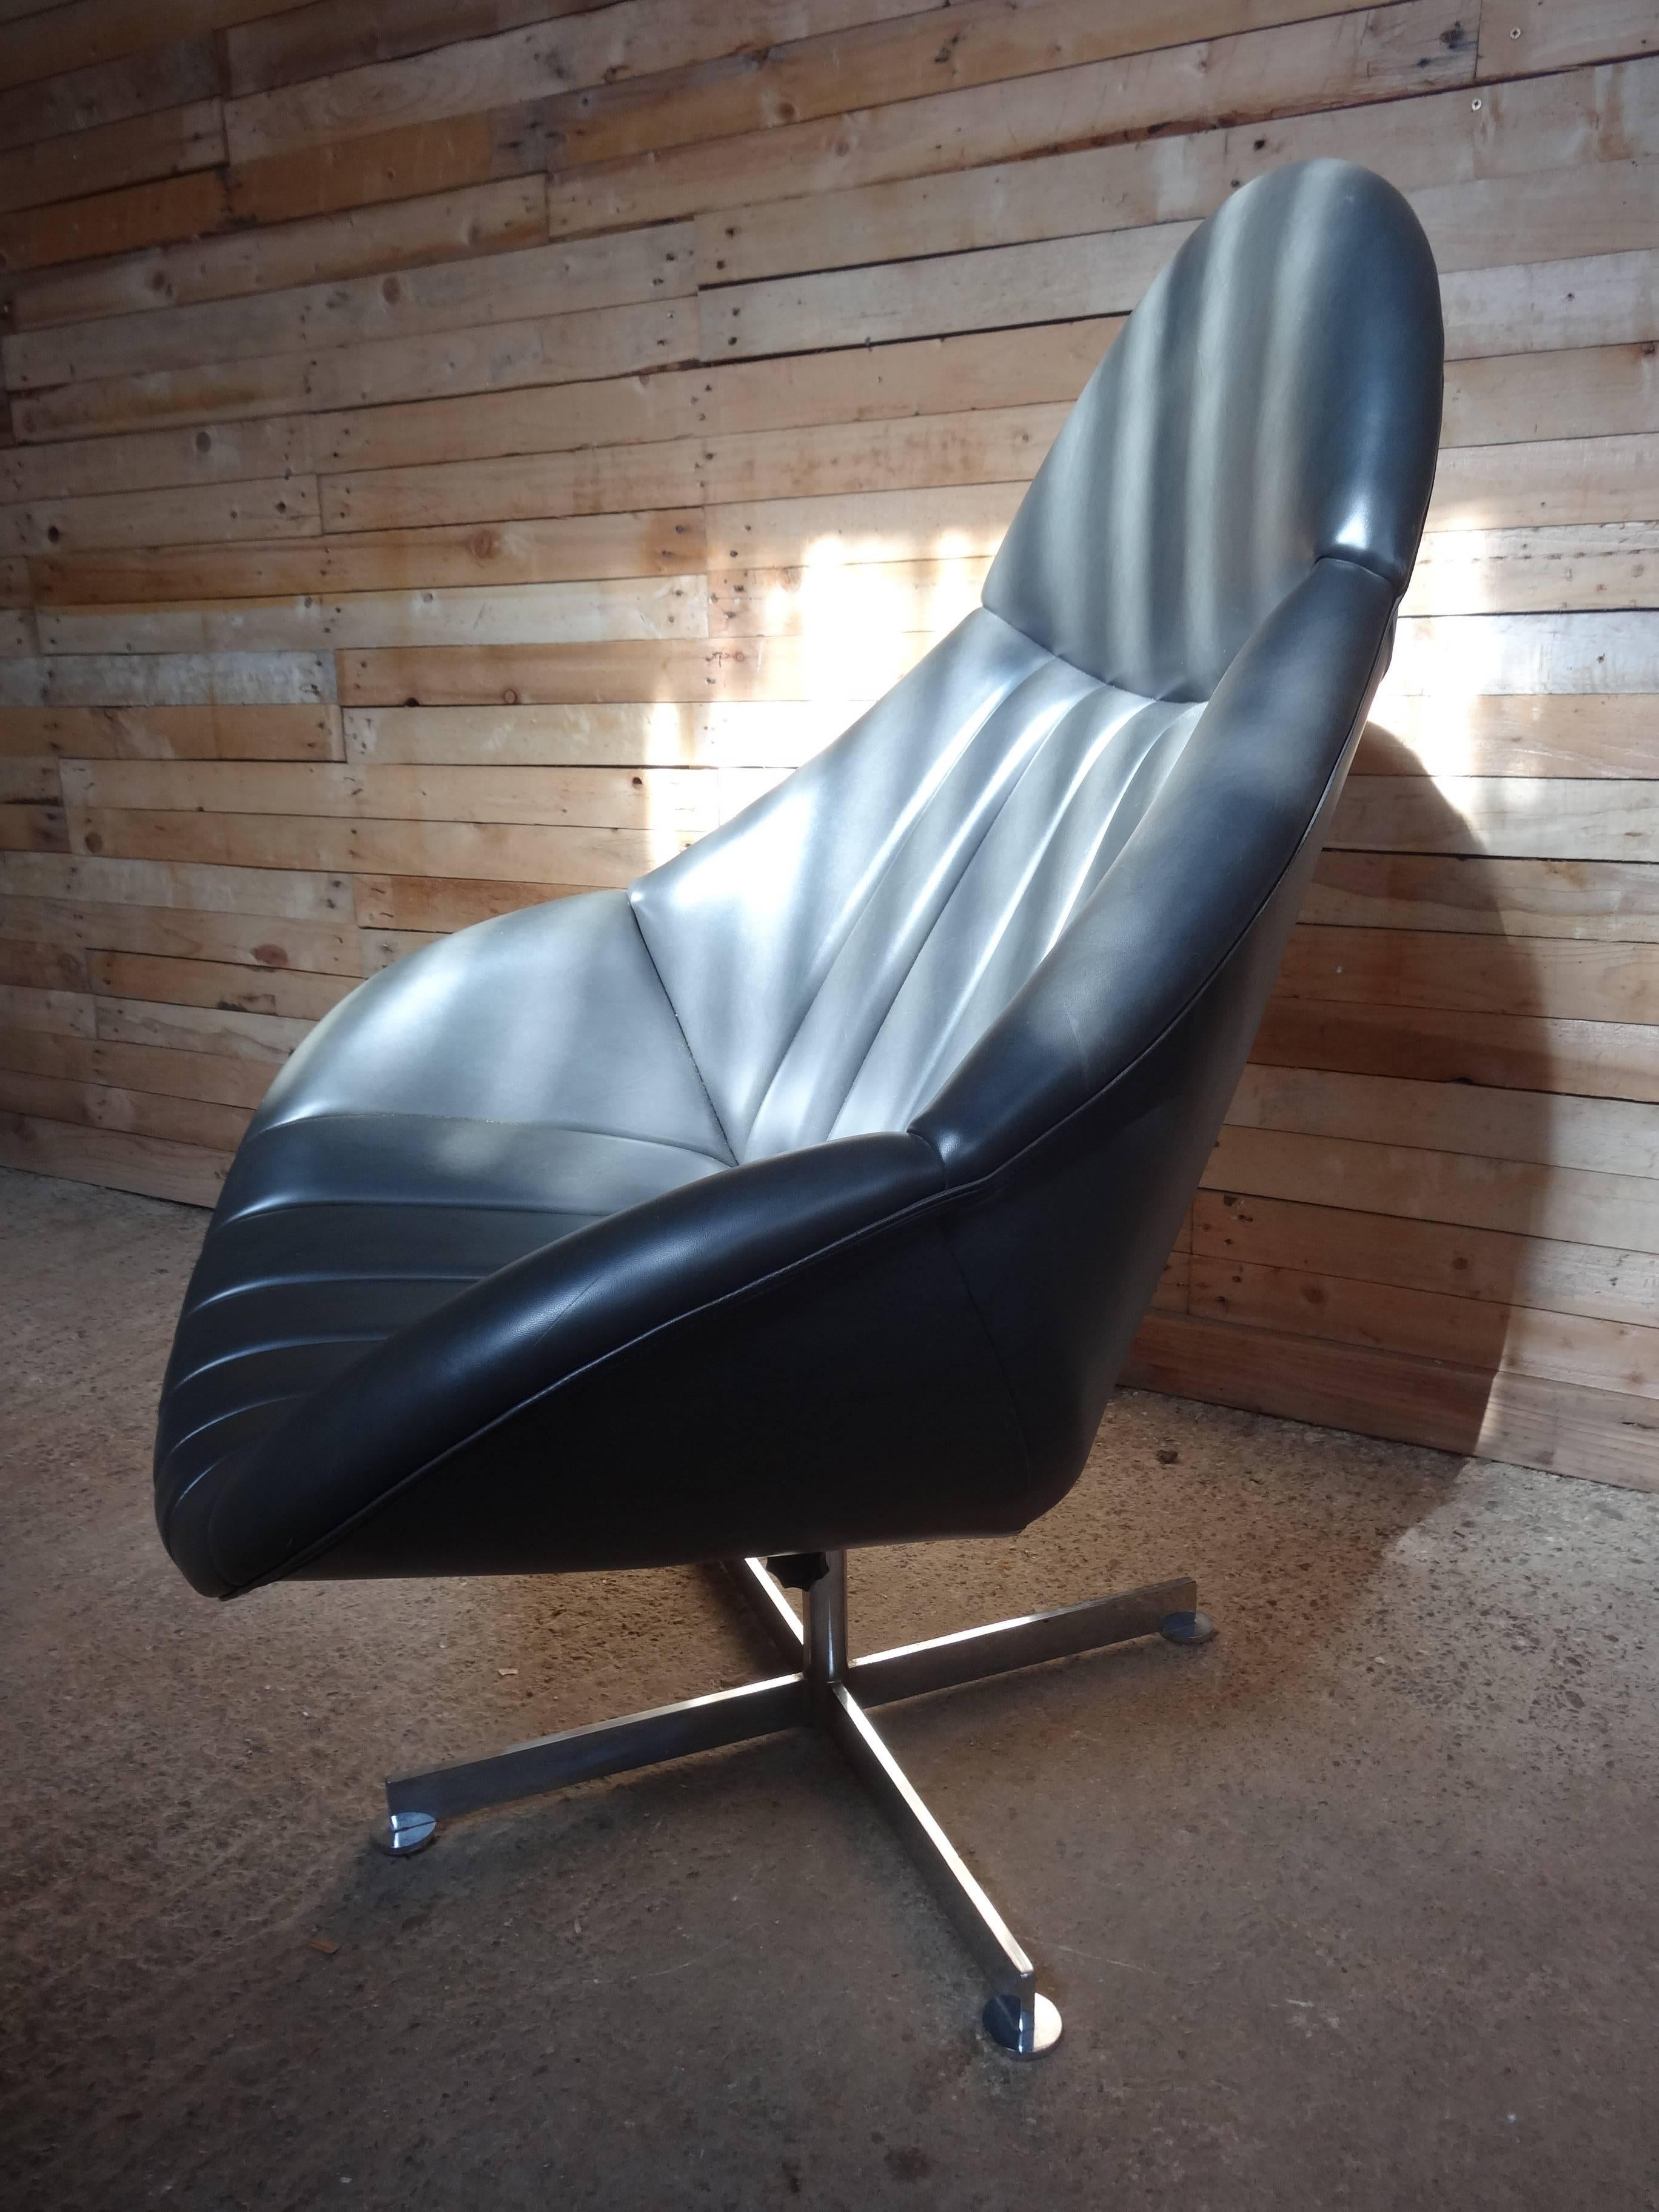 Stunning 1960s swivel egg chair designed by Rohe Noorwolde, chair it is covered in a dark grey/black leather, chair is in mint vintage condition. 

Measures: Height 111cm, seat height 35cm, depth 85cm, width 80cm.

 